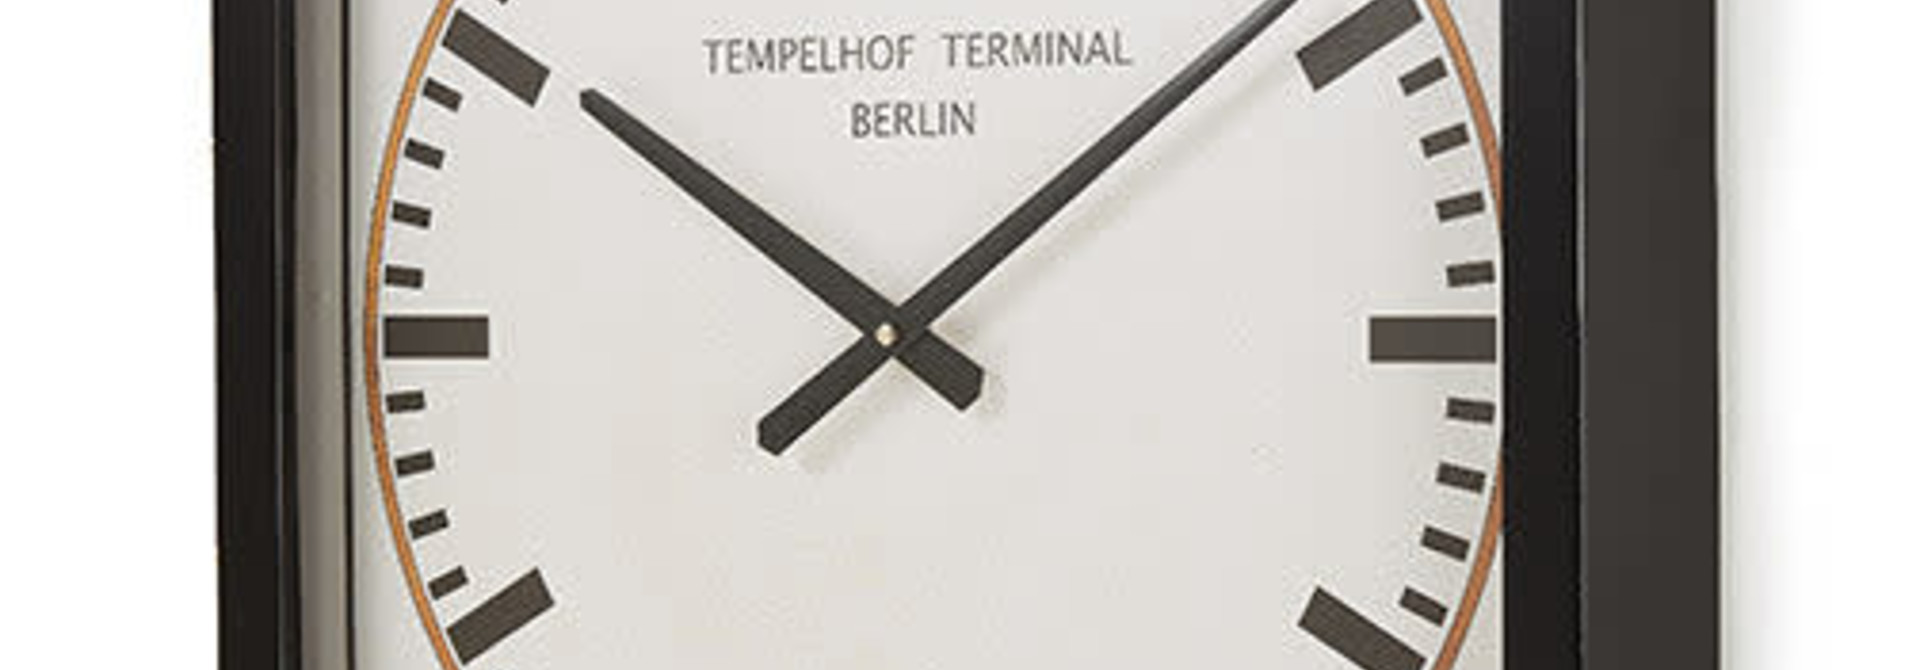 Tempelhof Terminal | The Wall Clock Collection, Black - 19 Inch x 19 Inch x 3.5 Inch